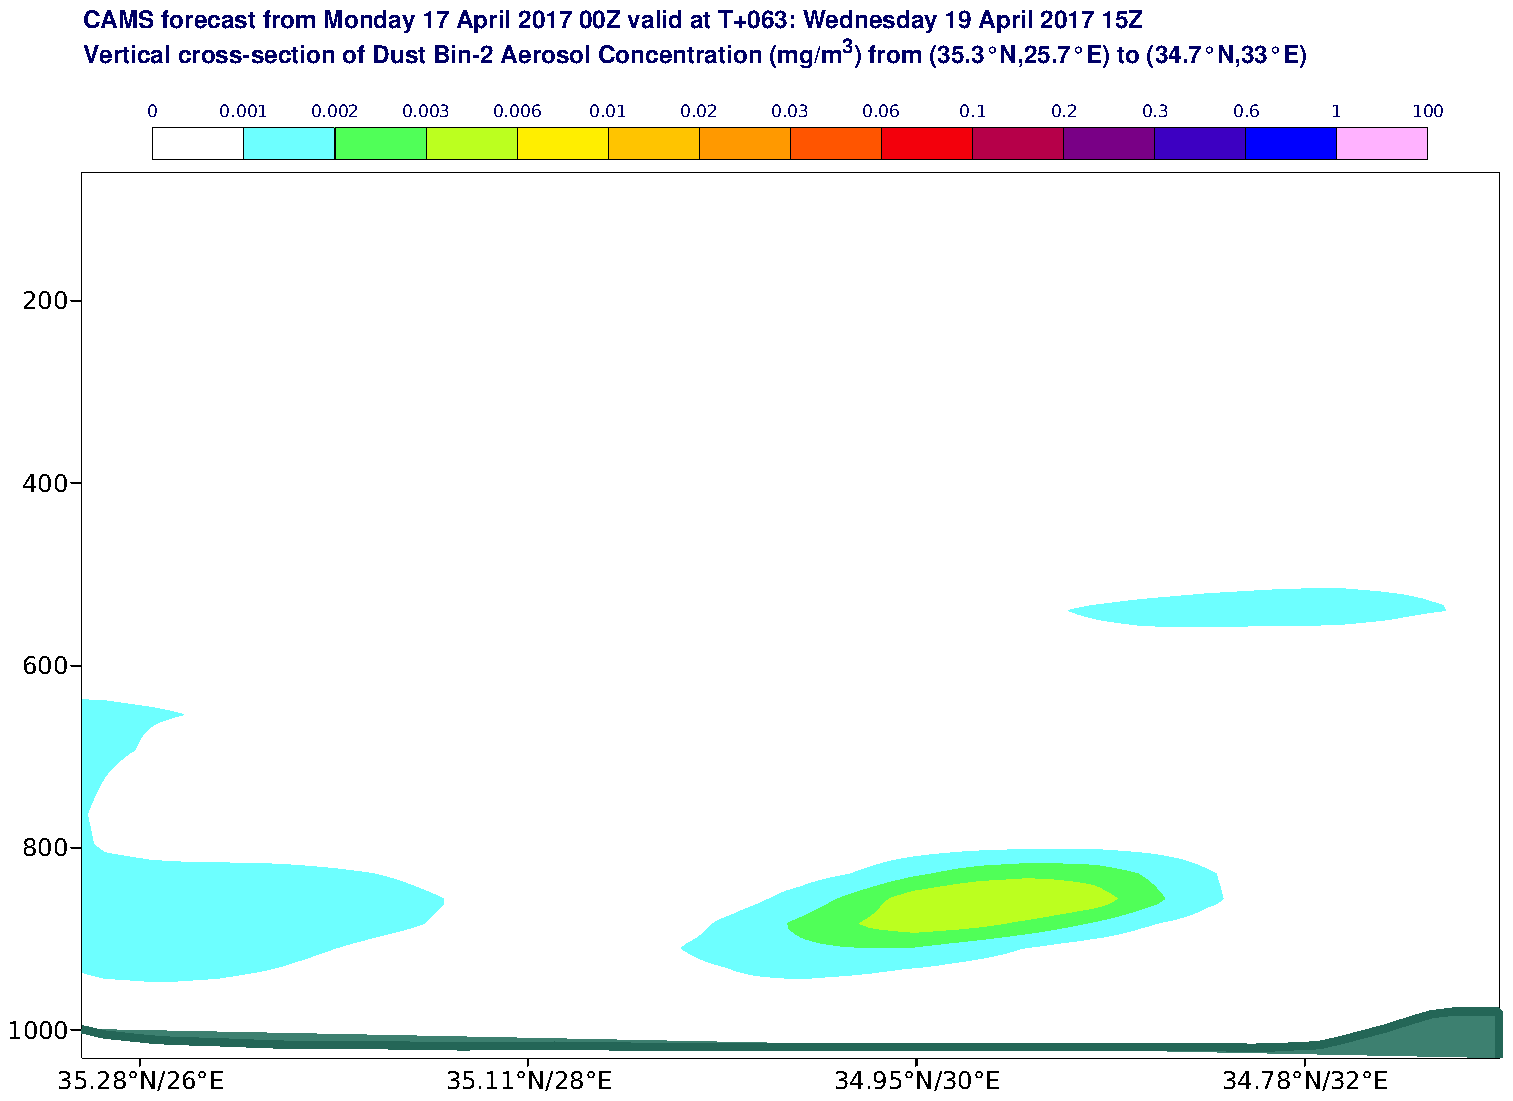 Vertical cross-section of Dust Bin-2 Aerosol Concentration (mg/m3) valid at T63 - 2017-04-19 15:00